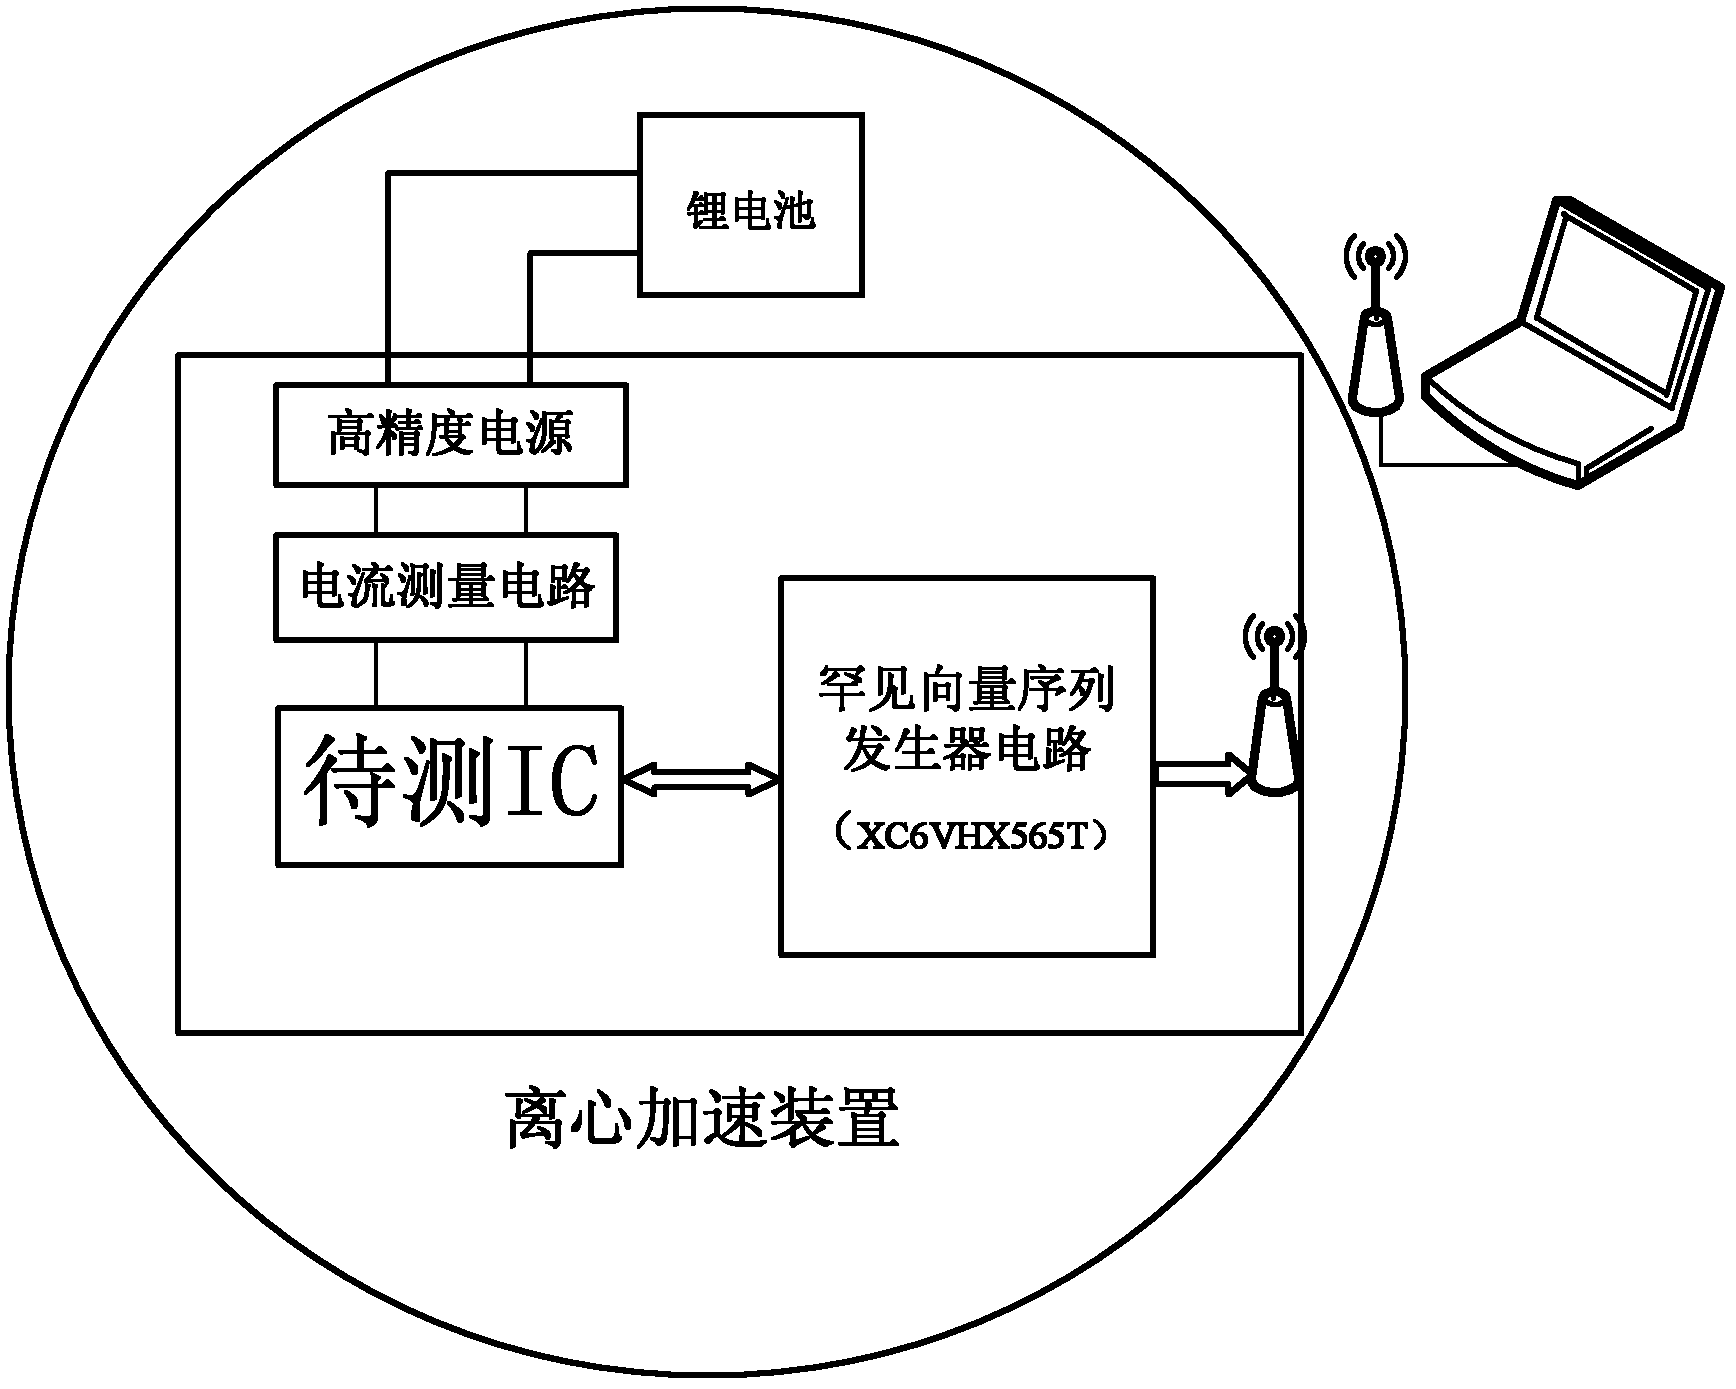 Nondestructive detecting method of mixed activated hardware Trojan horse in integrated circuit